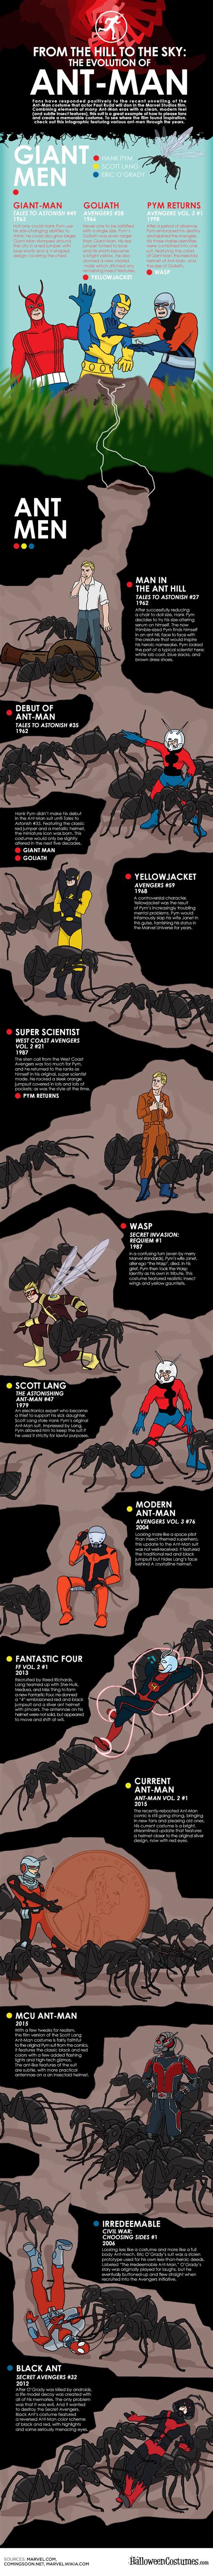 Infographic The Evolution Of Ant Man